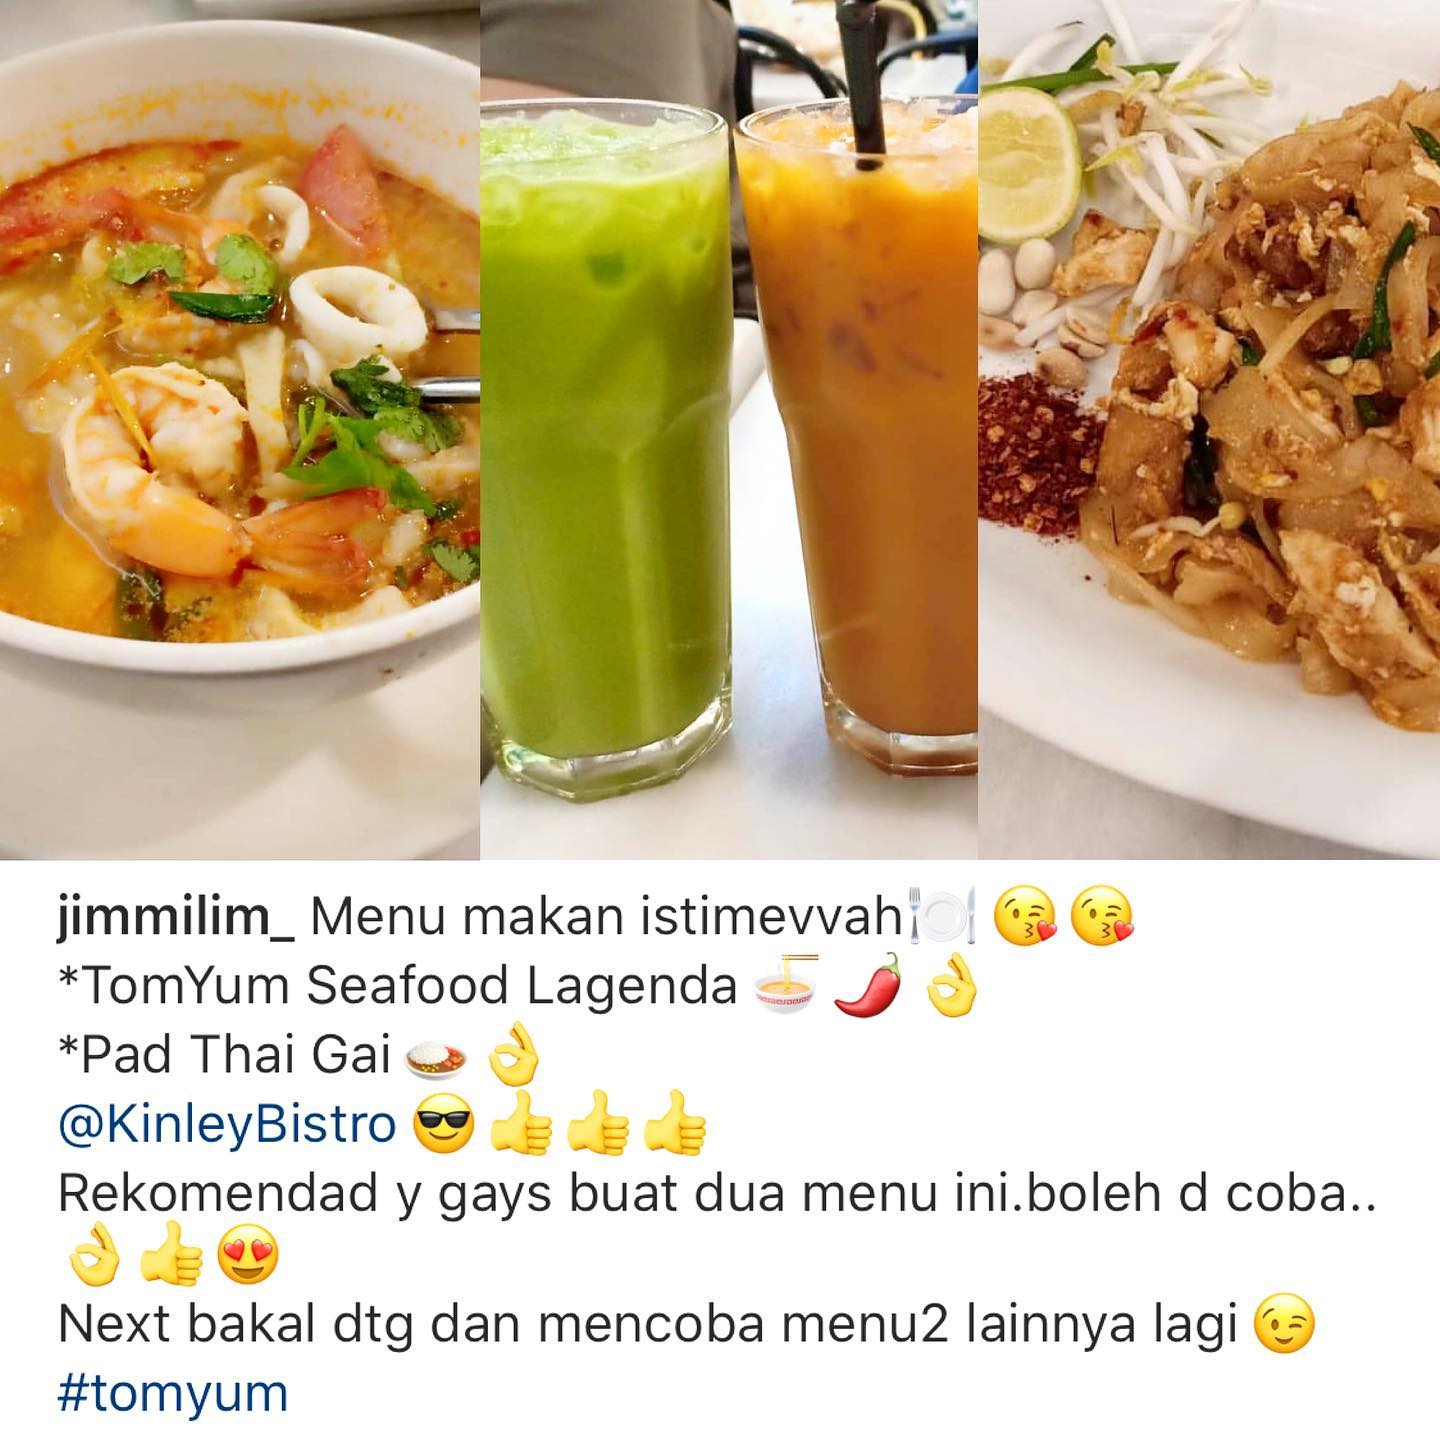 Menu makanan istimewah! Kinley Thai Bistro Medan
Thank you for sharing your kindest review and recommendation to our food @jimmilim_ ️️
Read more